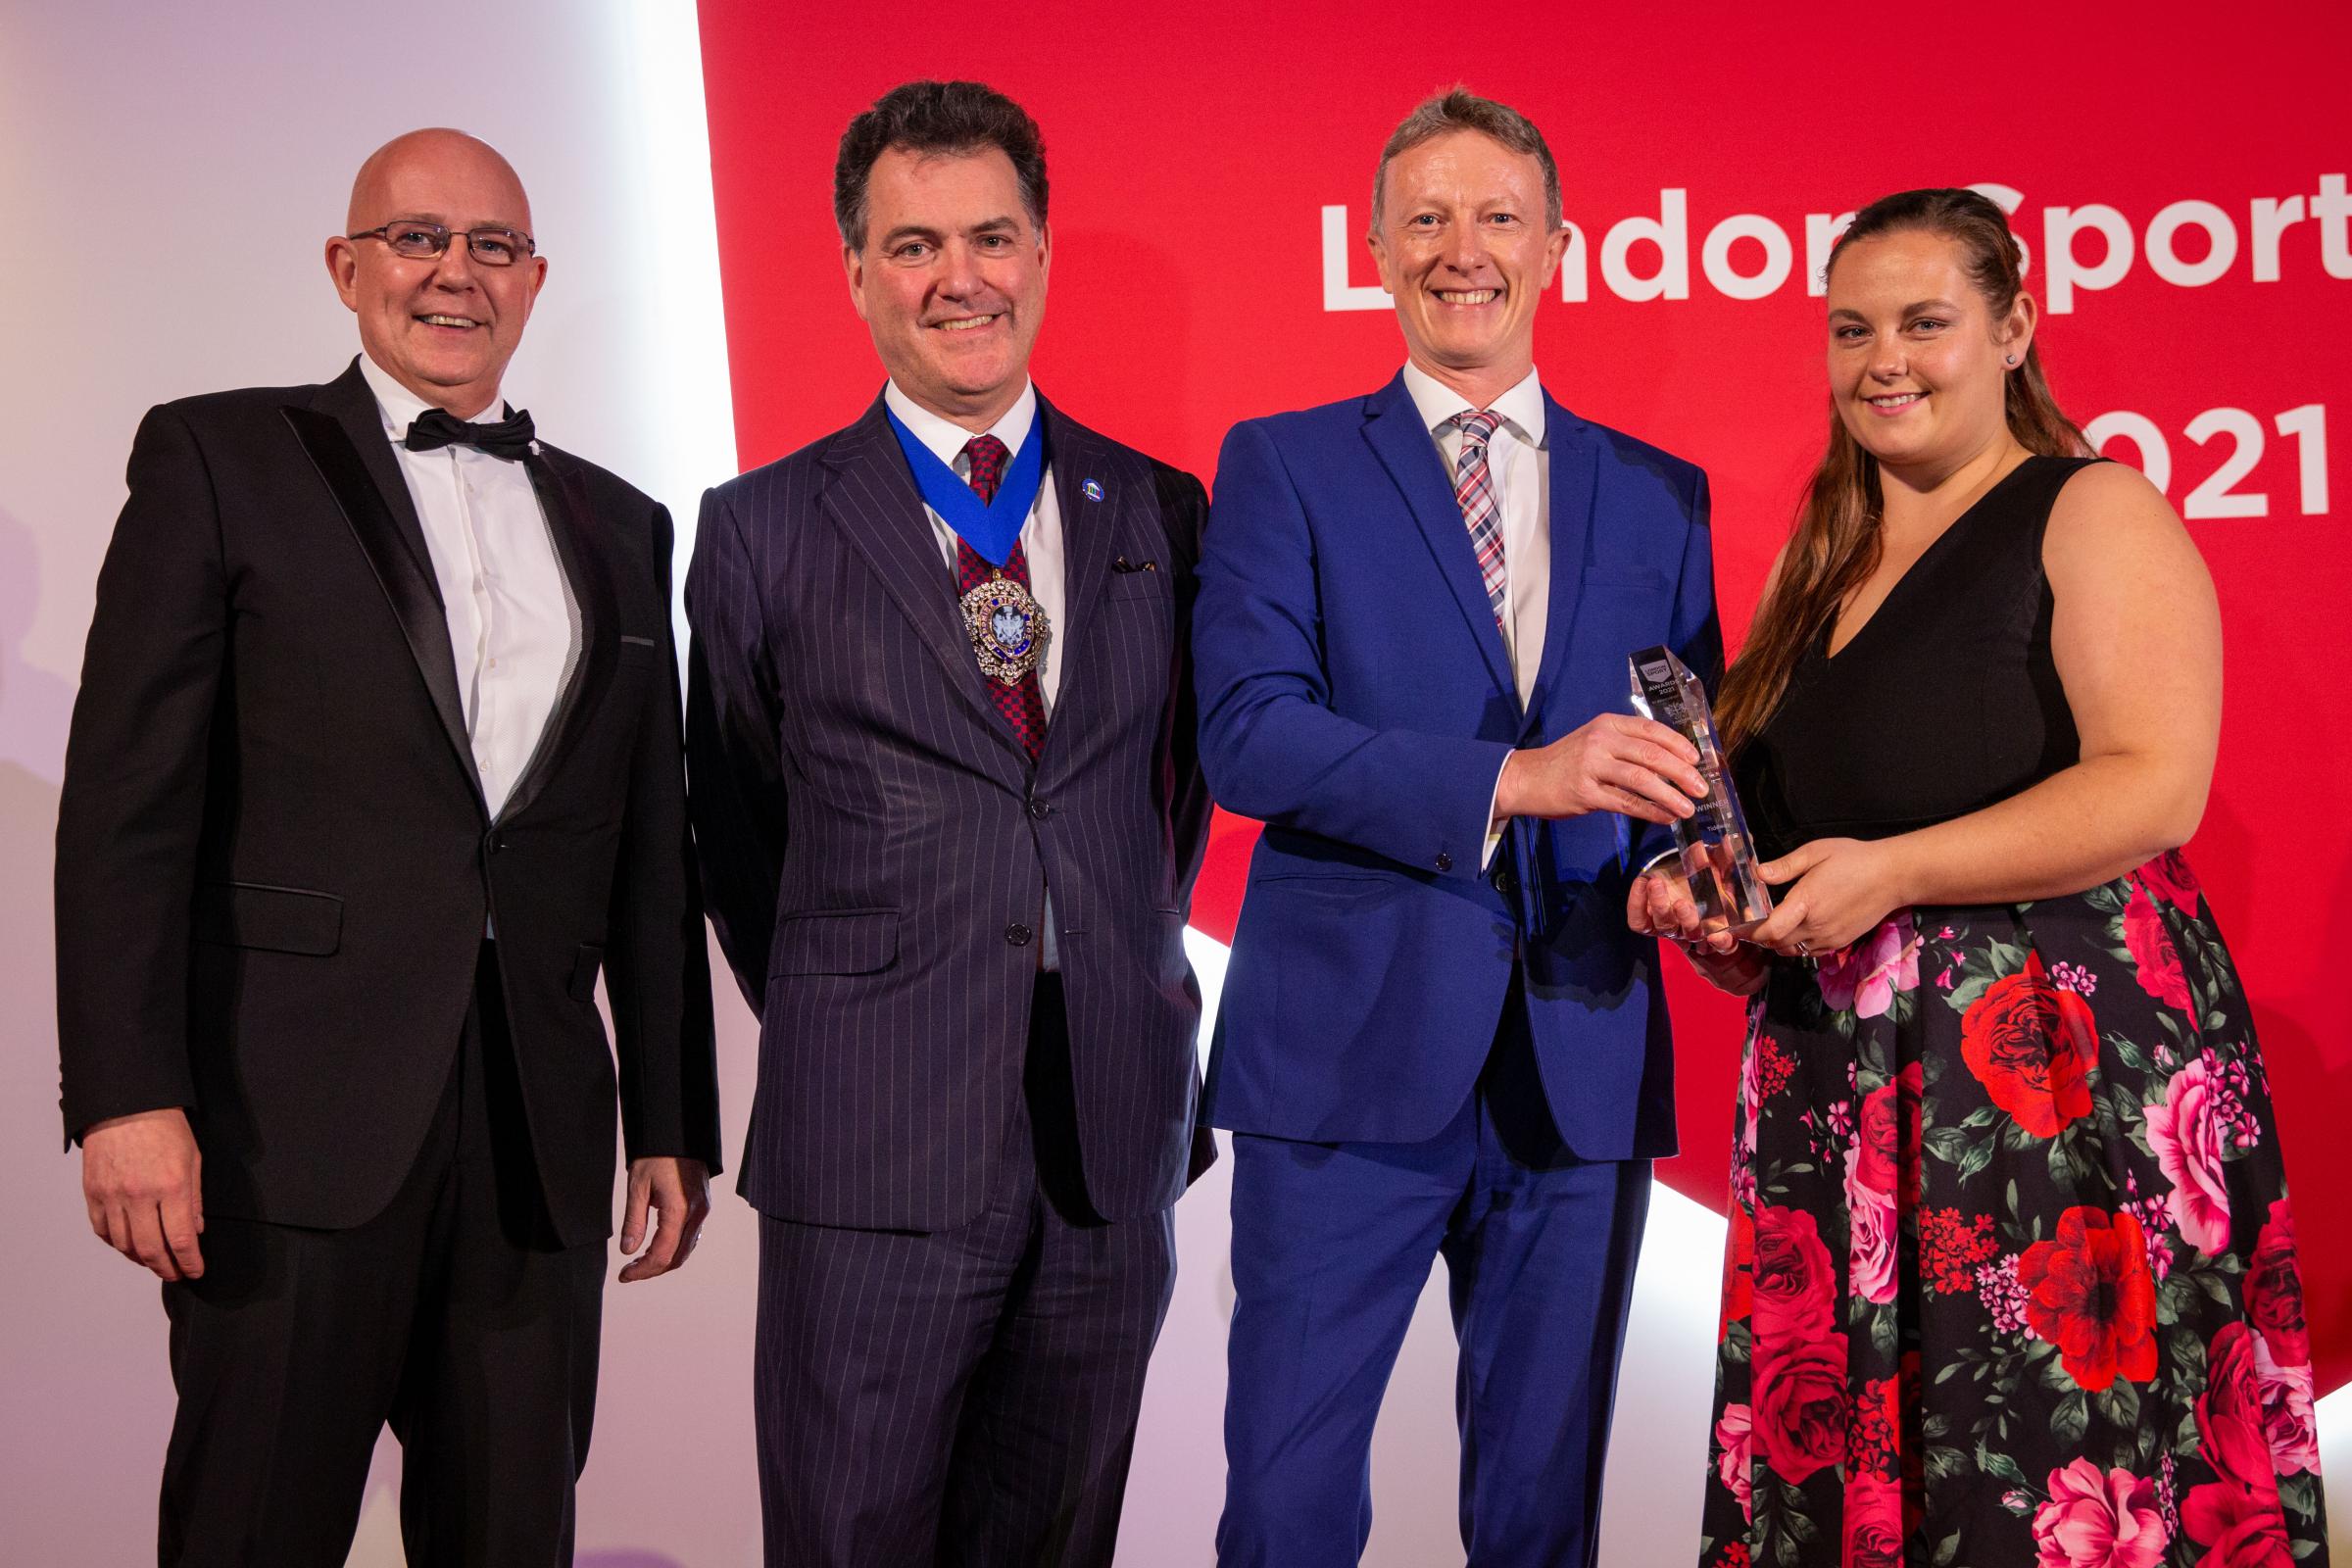 Game-changers Tideway win Business Contribution prize at the London Sport Awards